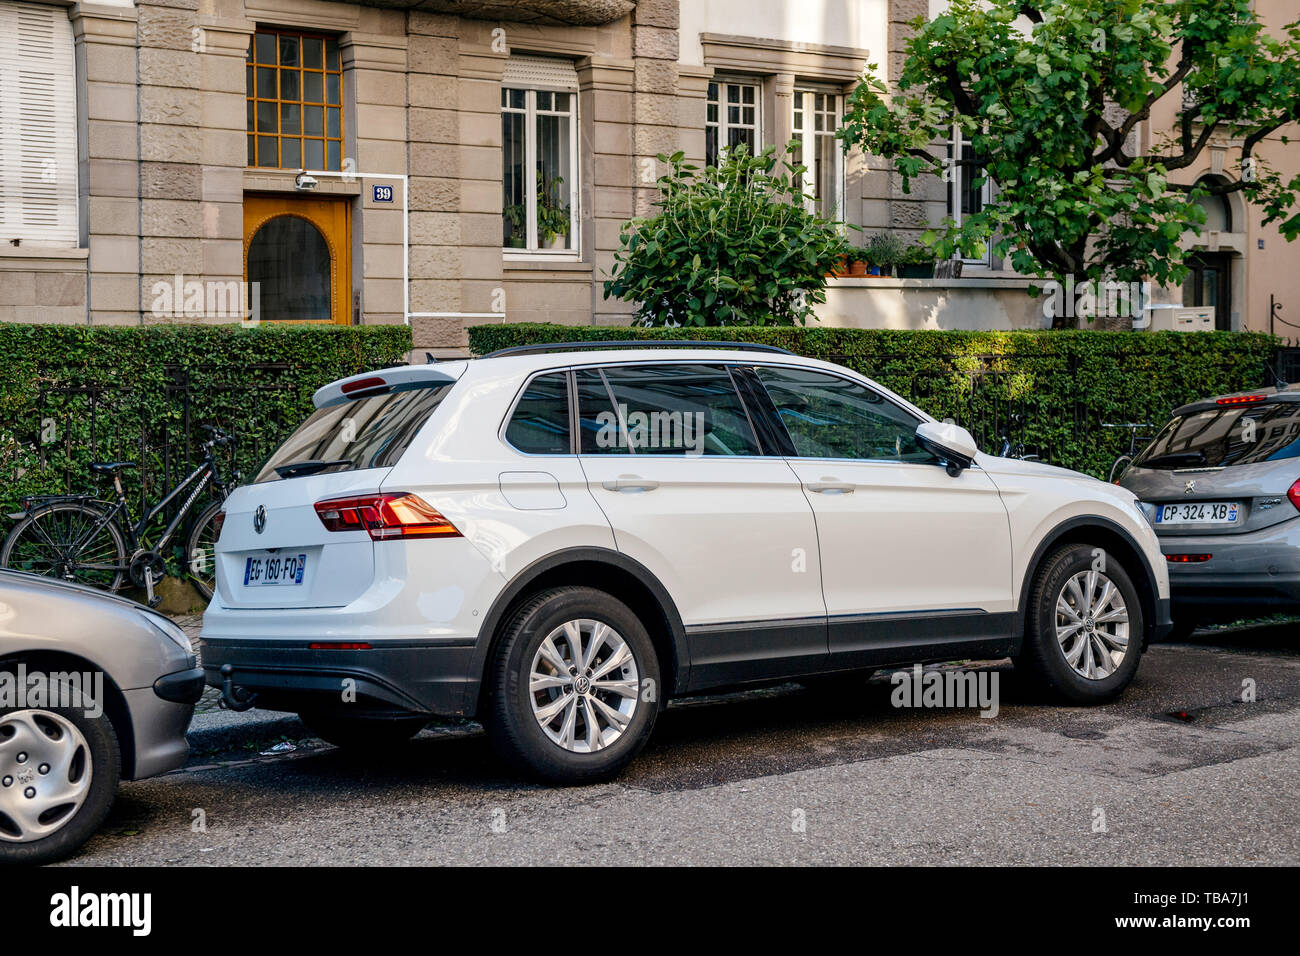 Strasbourg, France - May 19, 2017: Side view of white Volkswagen SUV parked on French street in city center  Stock Photo